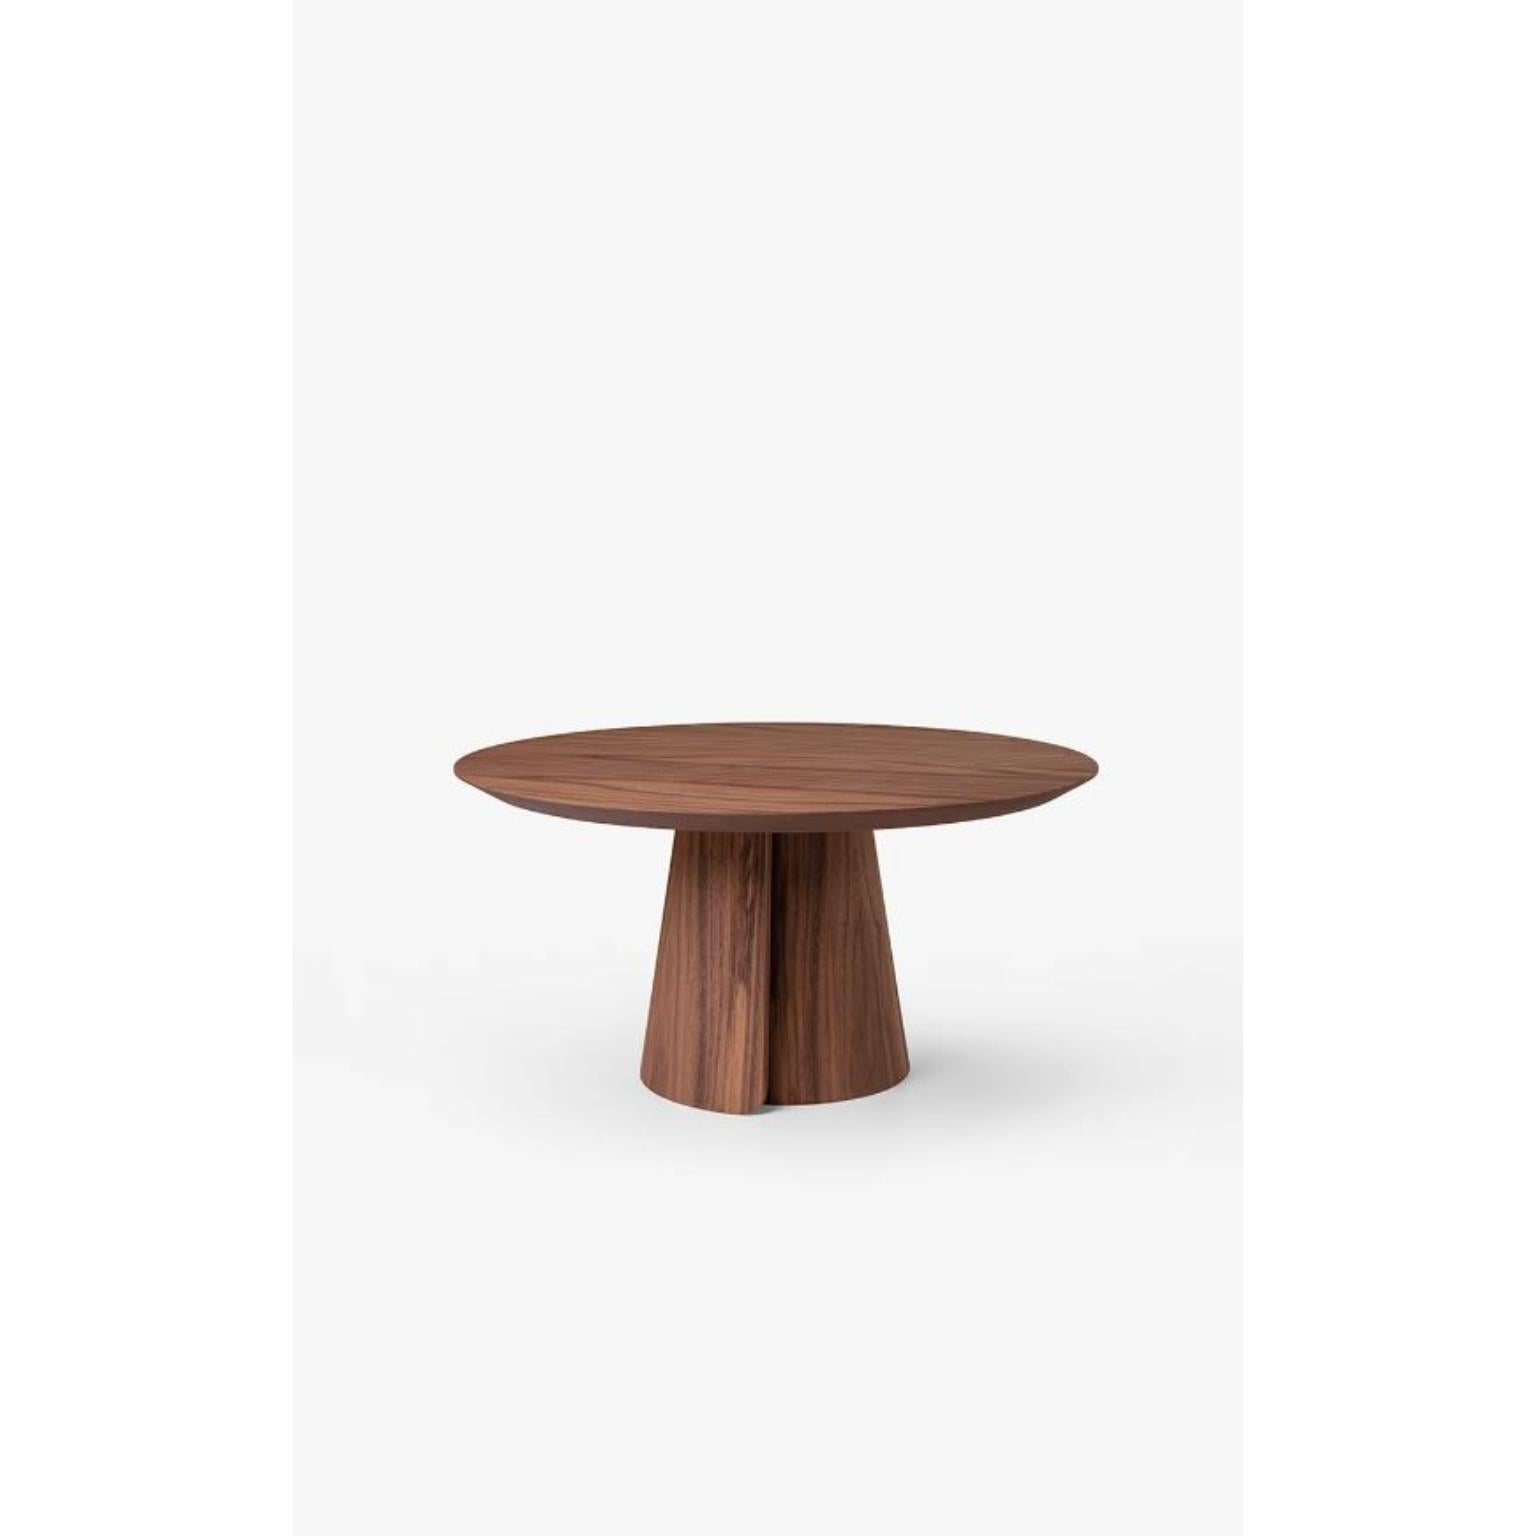 Volta Dining Table 70 by Wentz
Dimensions: D 70 x W 70 x H 35 cm
Materials: Wood, Plywood, MDF, Veneer, Steel


The Volta table references nature in its impermanence. The detail on the base suggests natural movements and refers to nature's